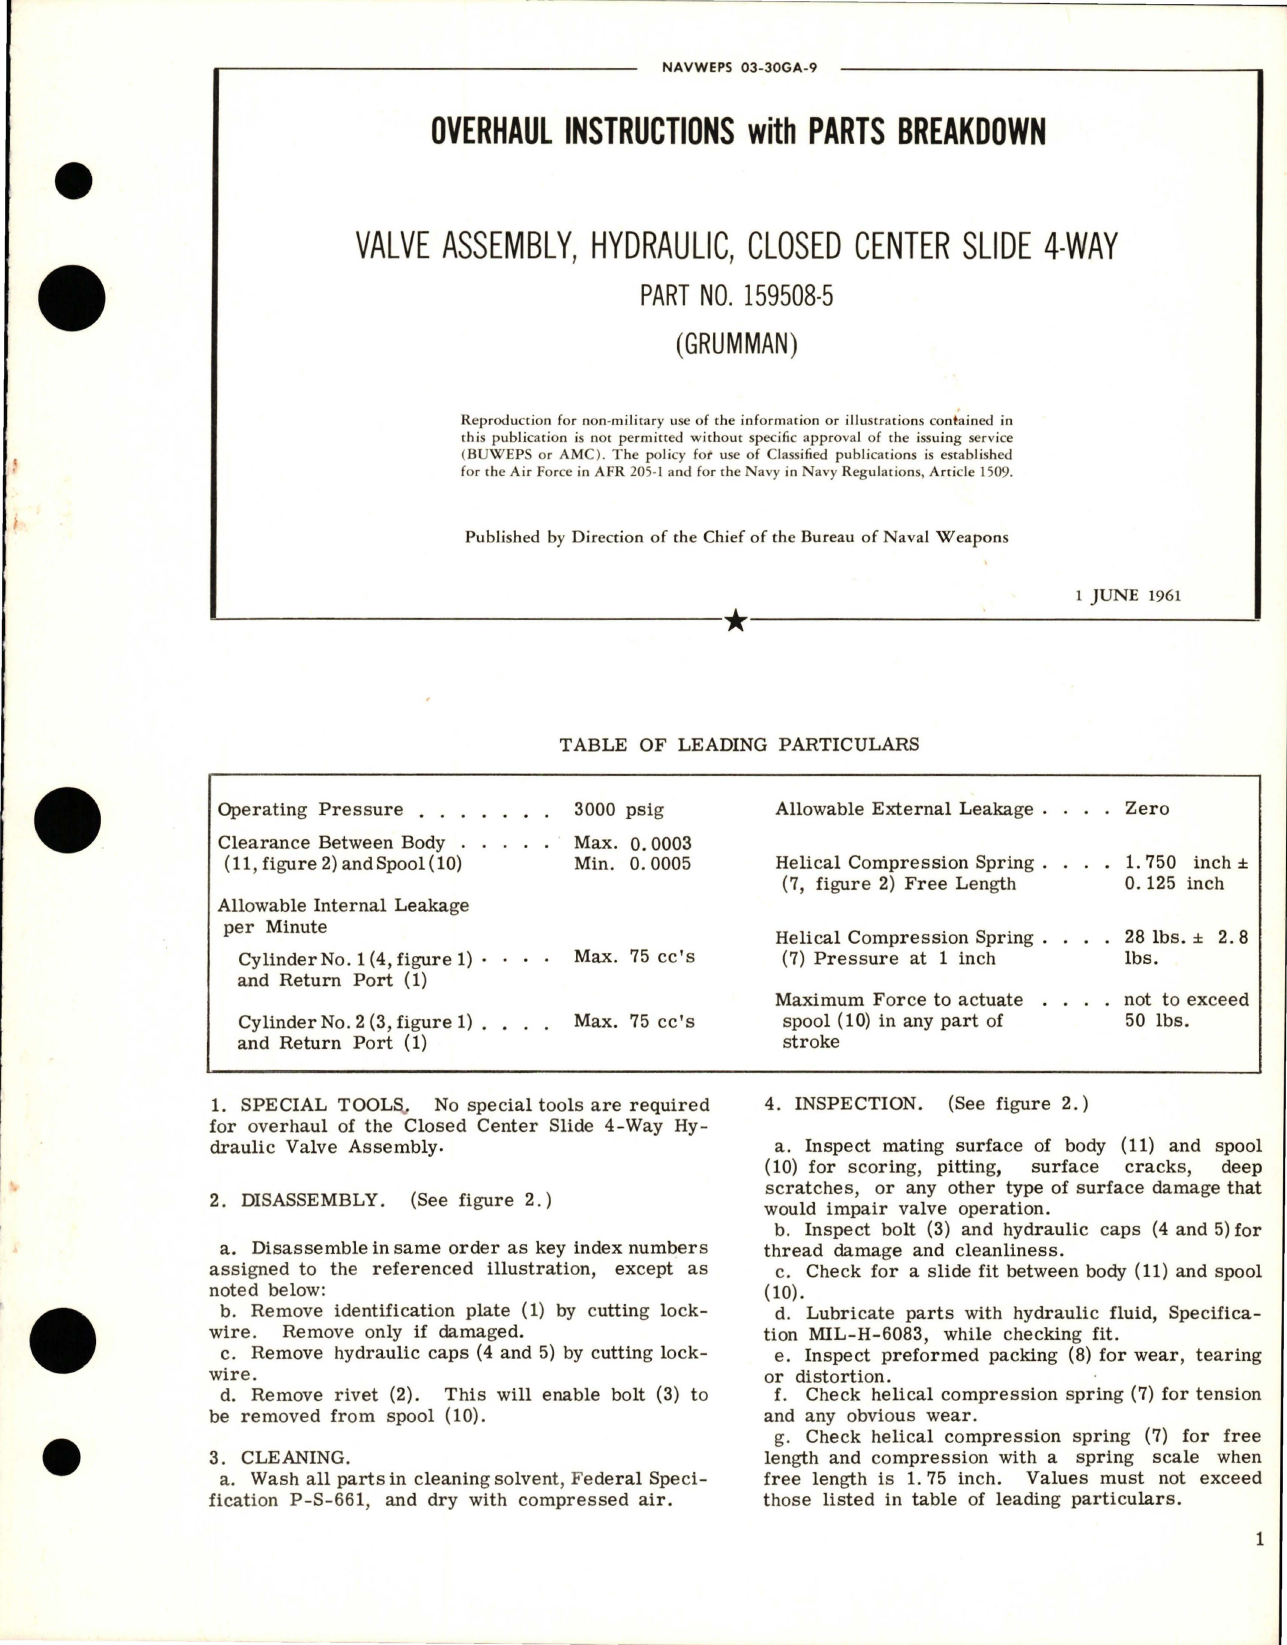 Sample page 1 from AirCorps Library document: Overhaul Instructions with Parts Breakdown for Hydraulic Closed Center Slide 4-Way Valve Assembly - Part 159508-5